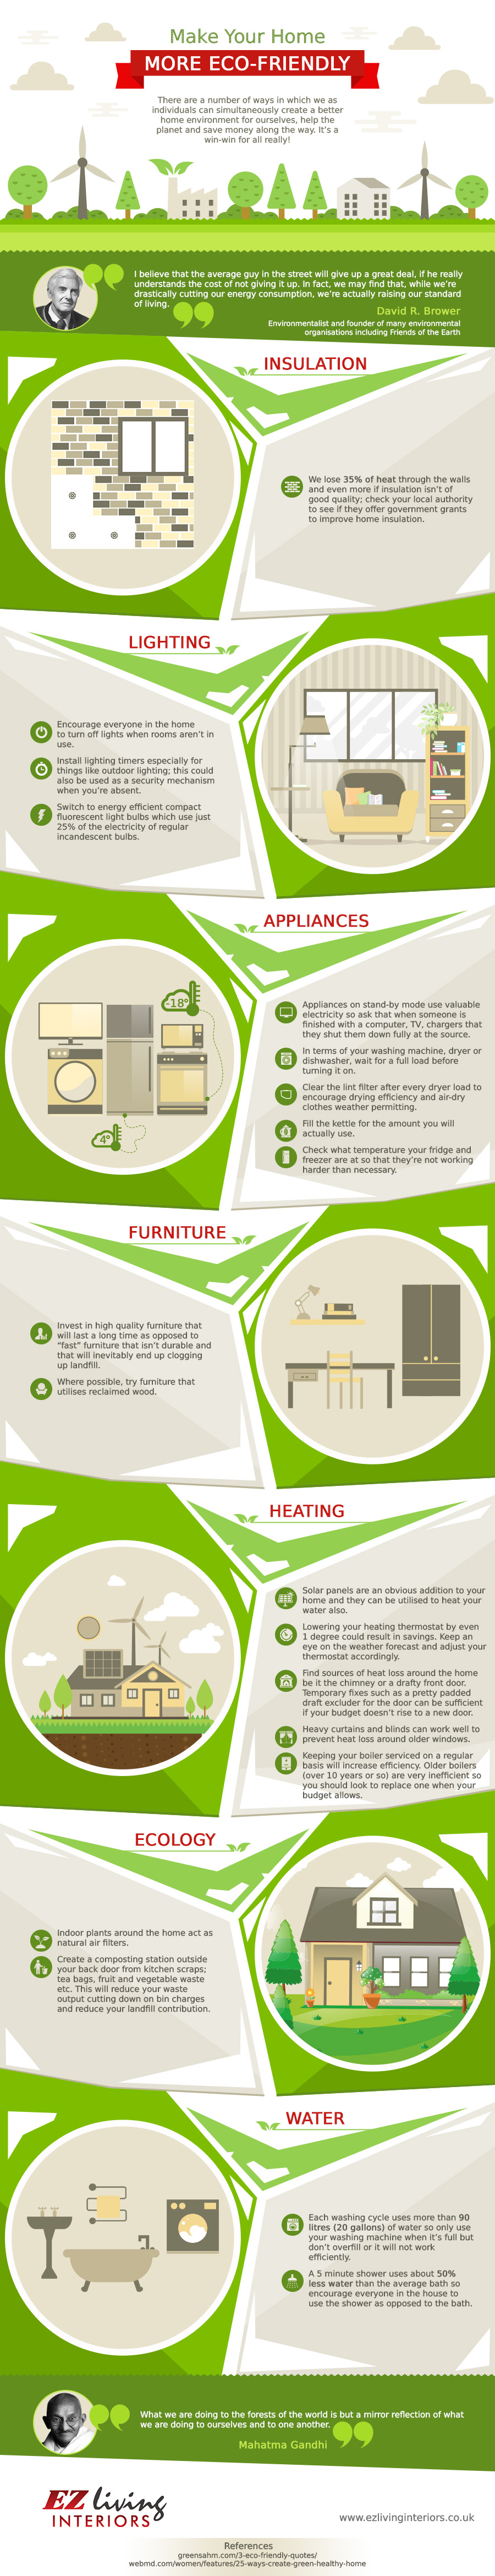 Infographic containing eco-friendly ideas for homeowners